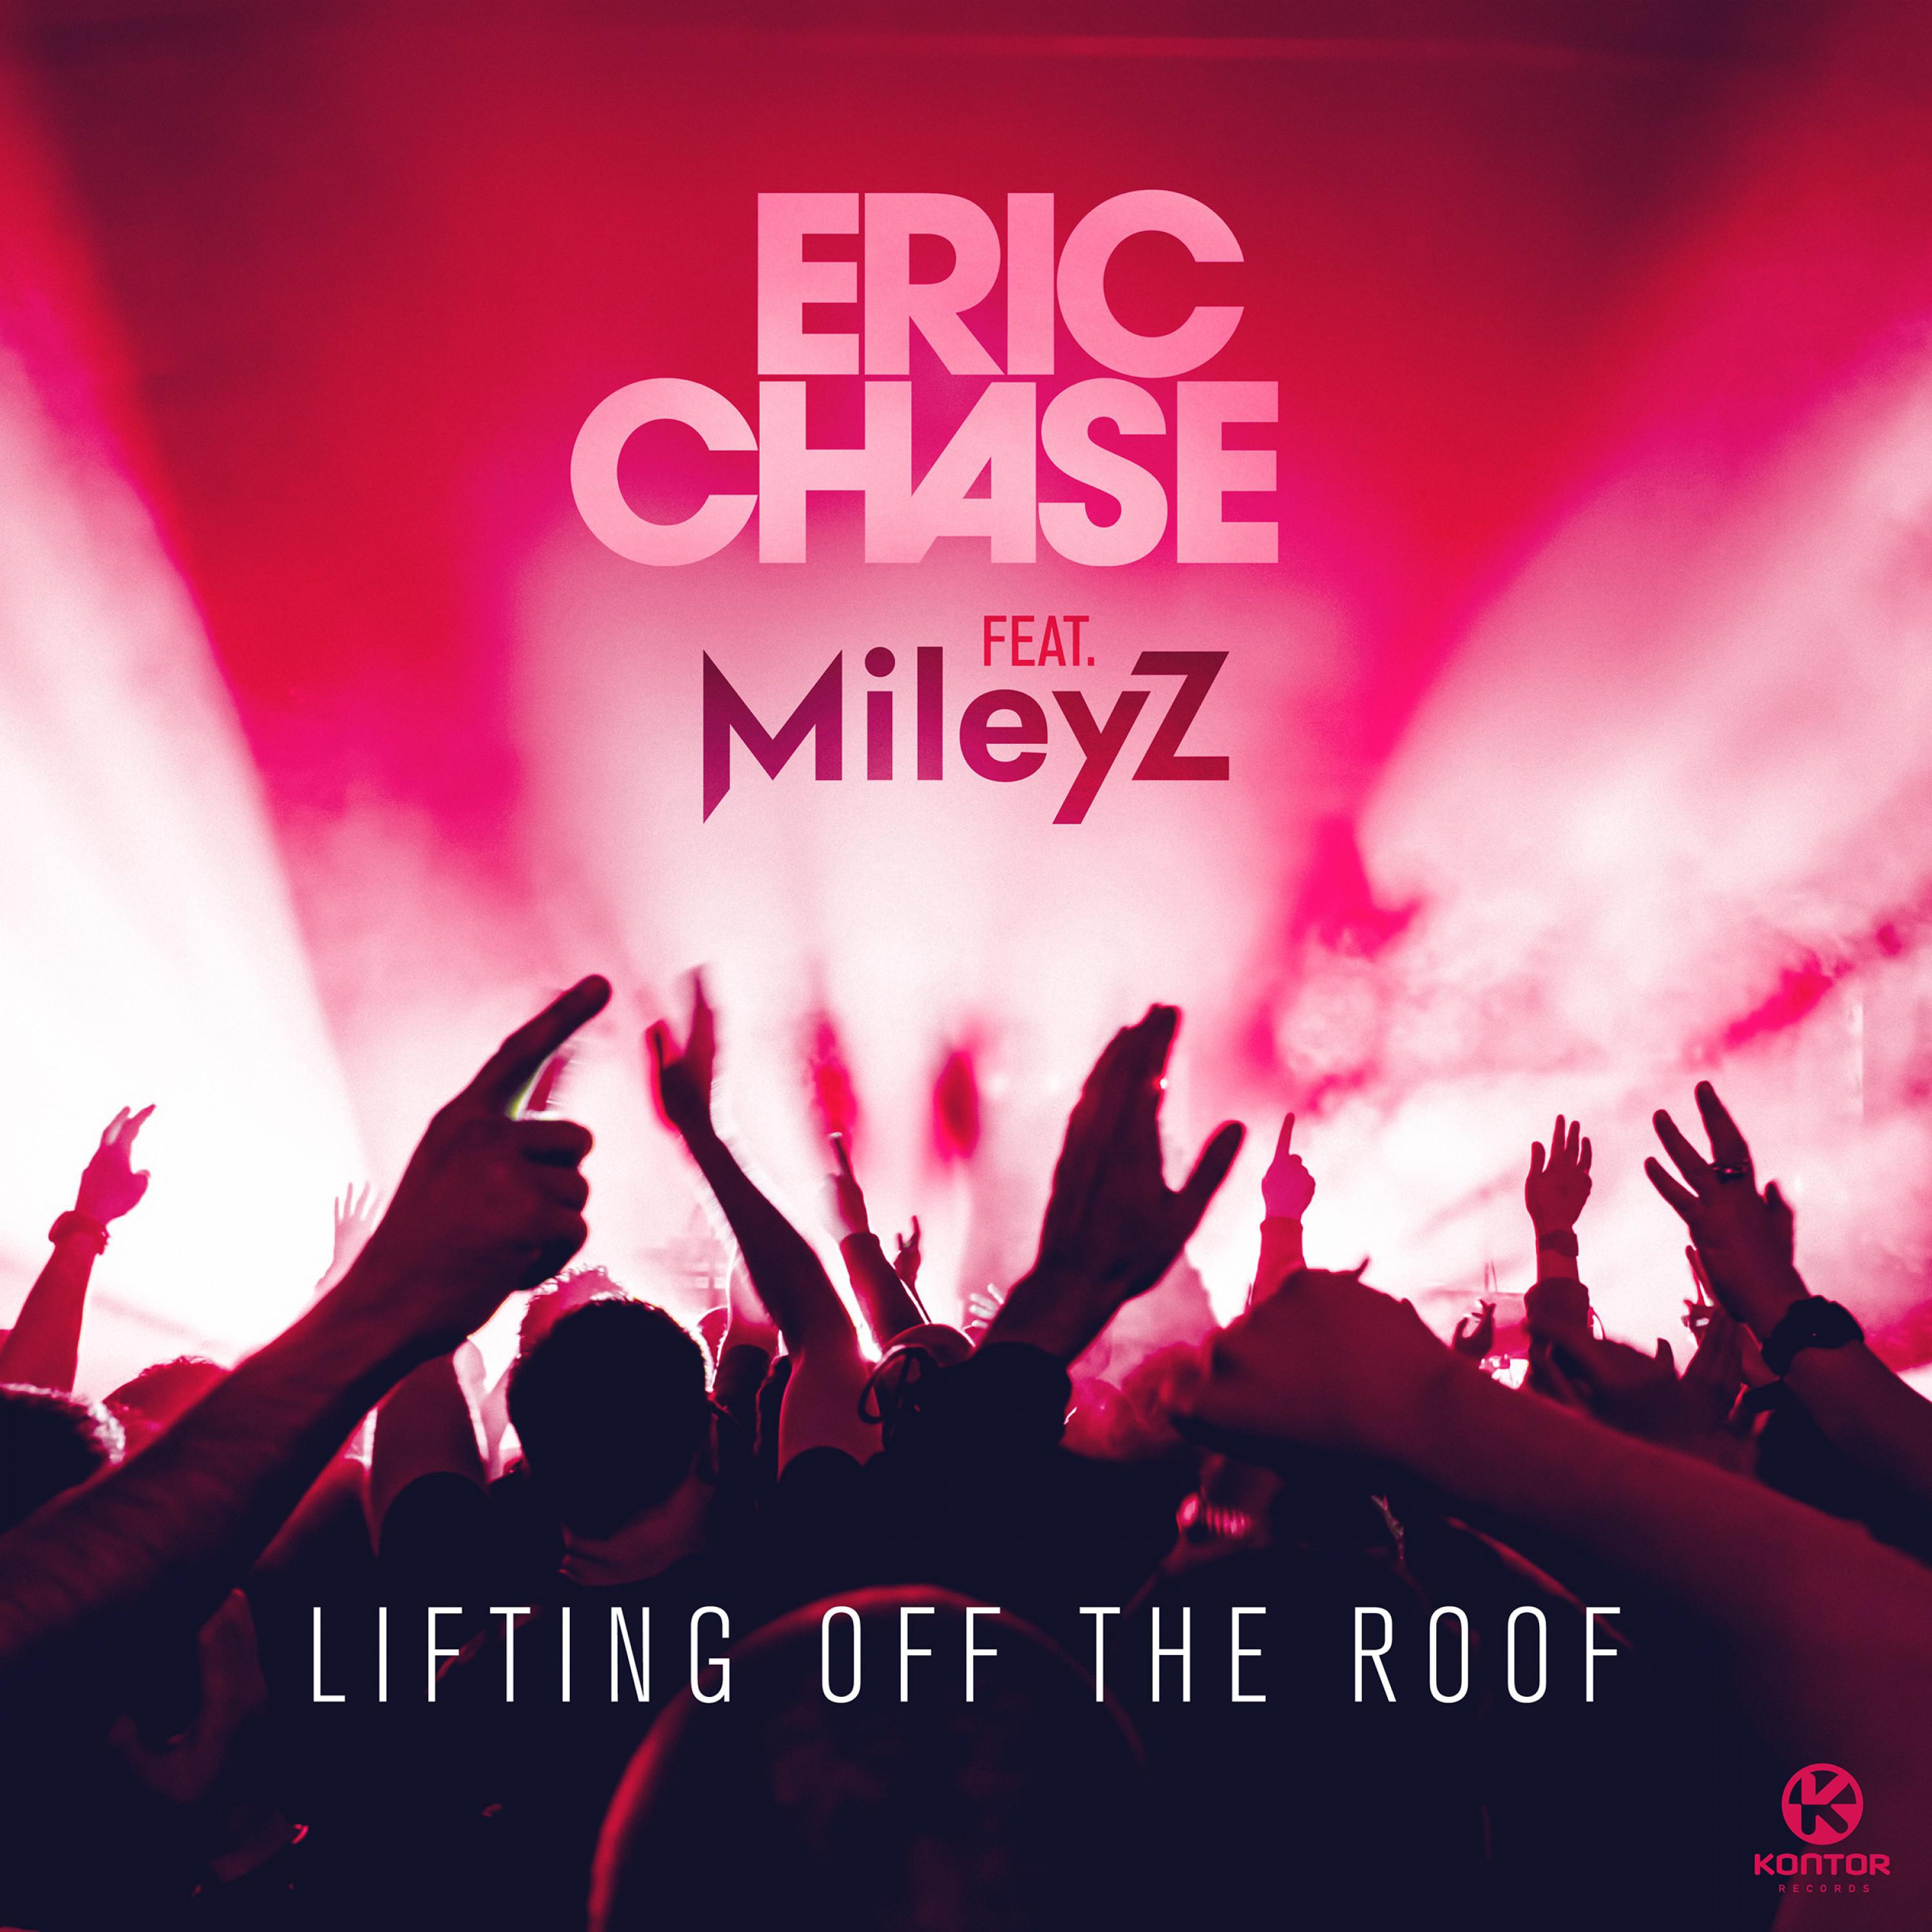 Lifting off the Roof